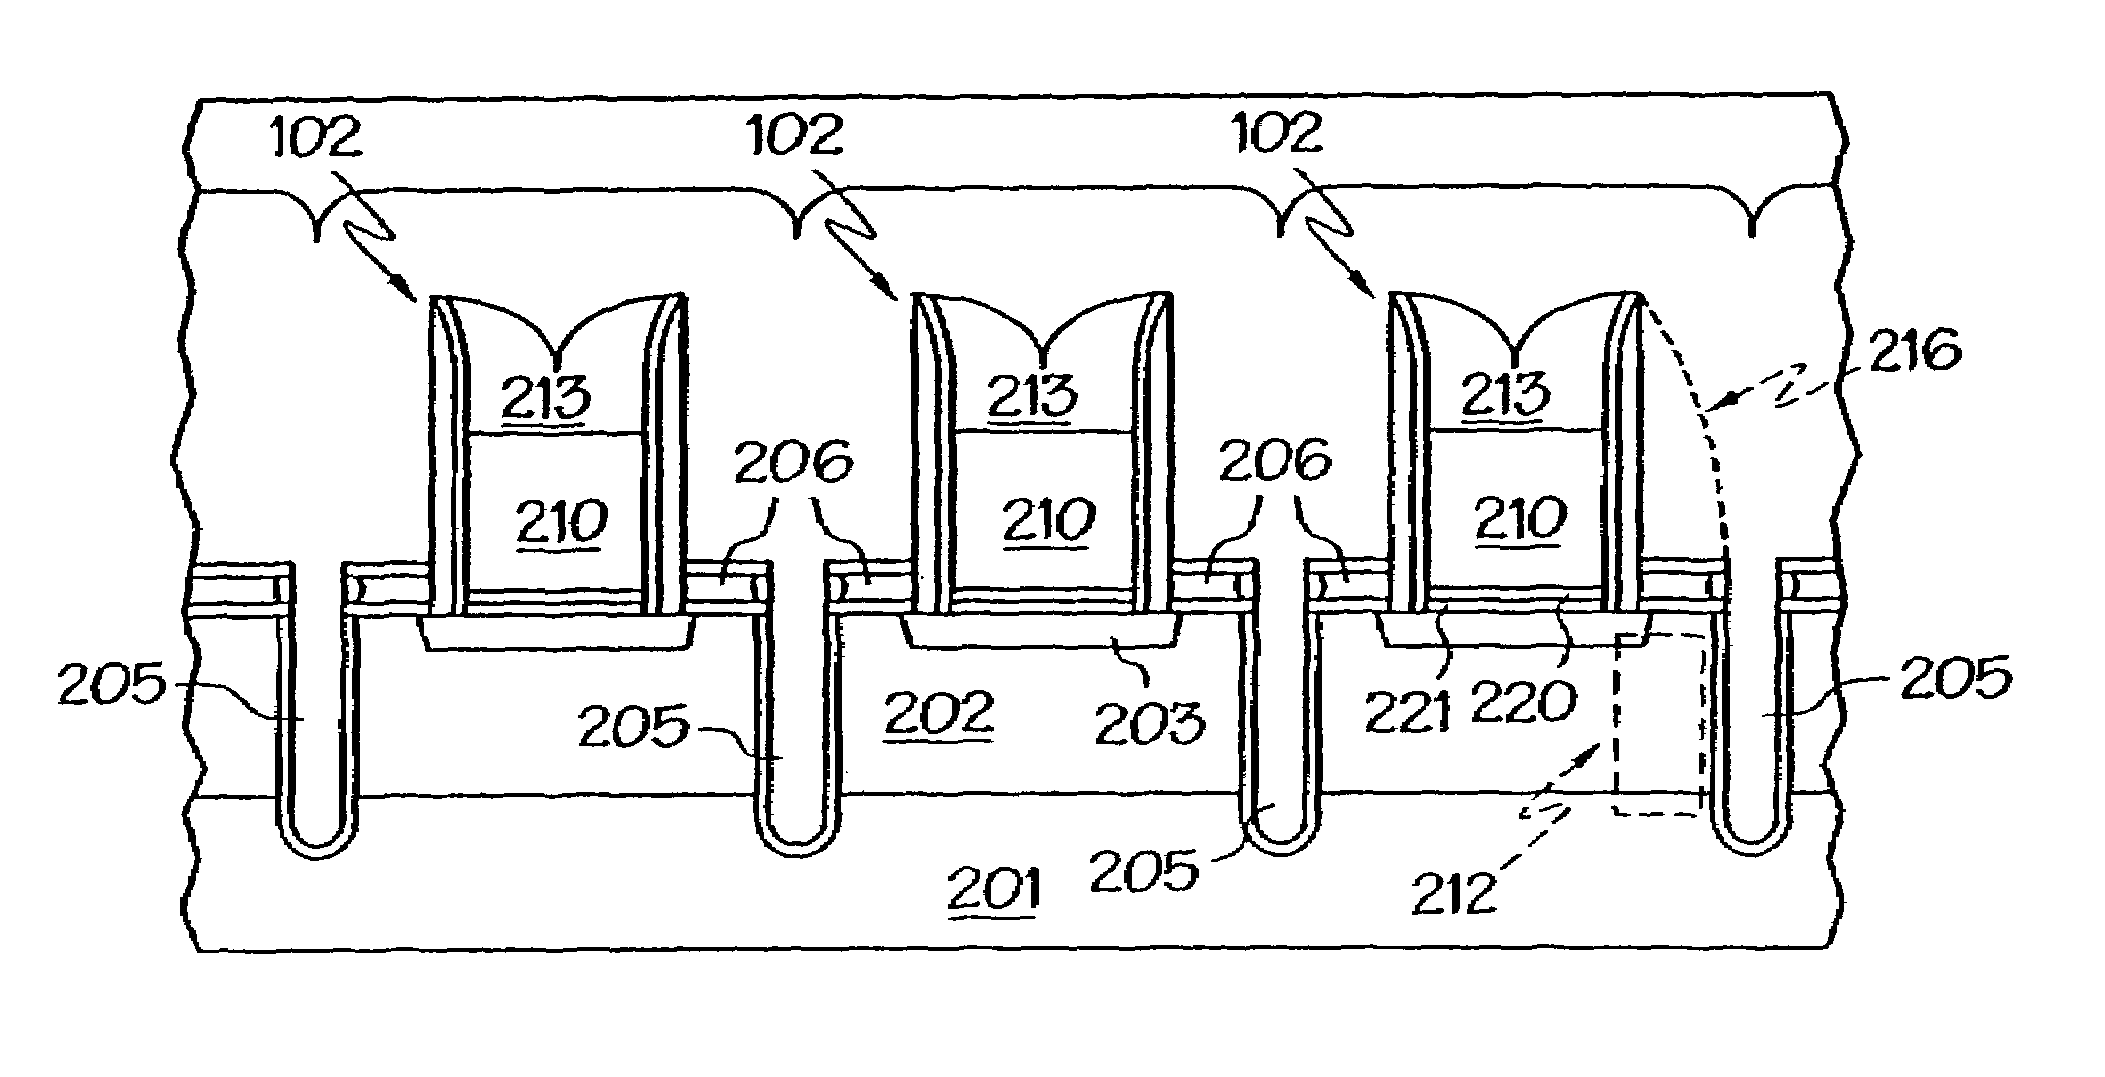 Fabricating a 2F<sup>2 </sup> memory device with a horizontal floating gate